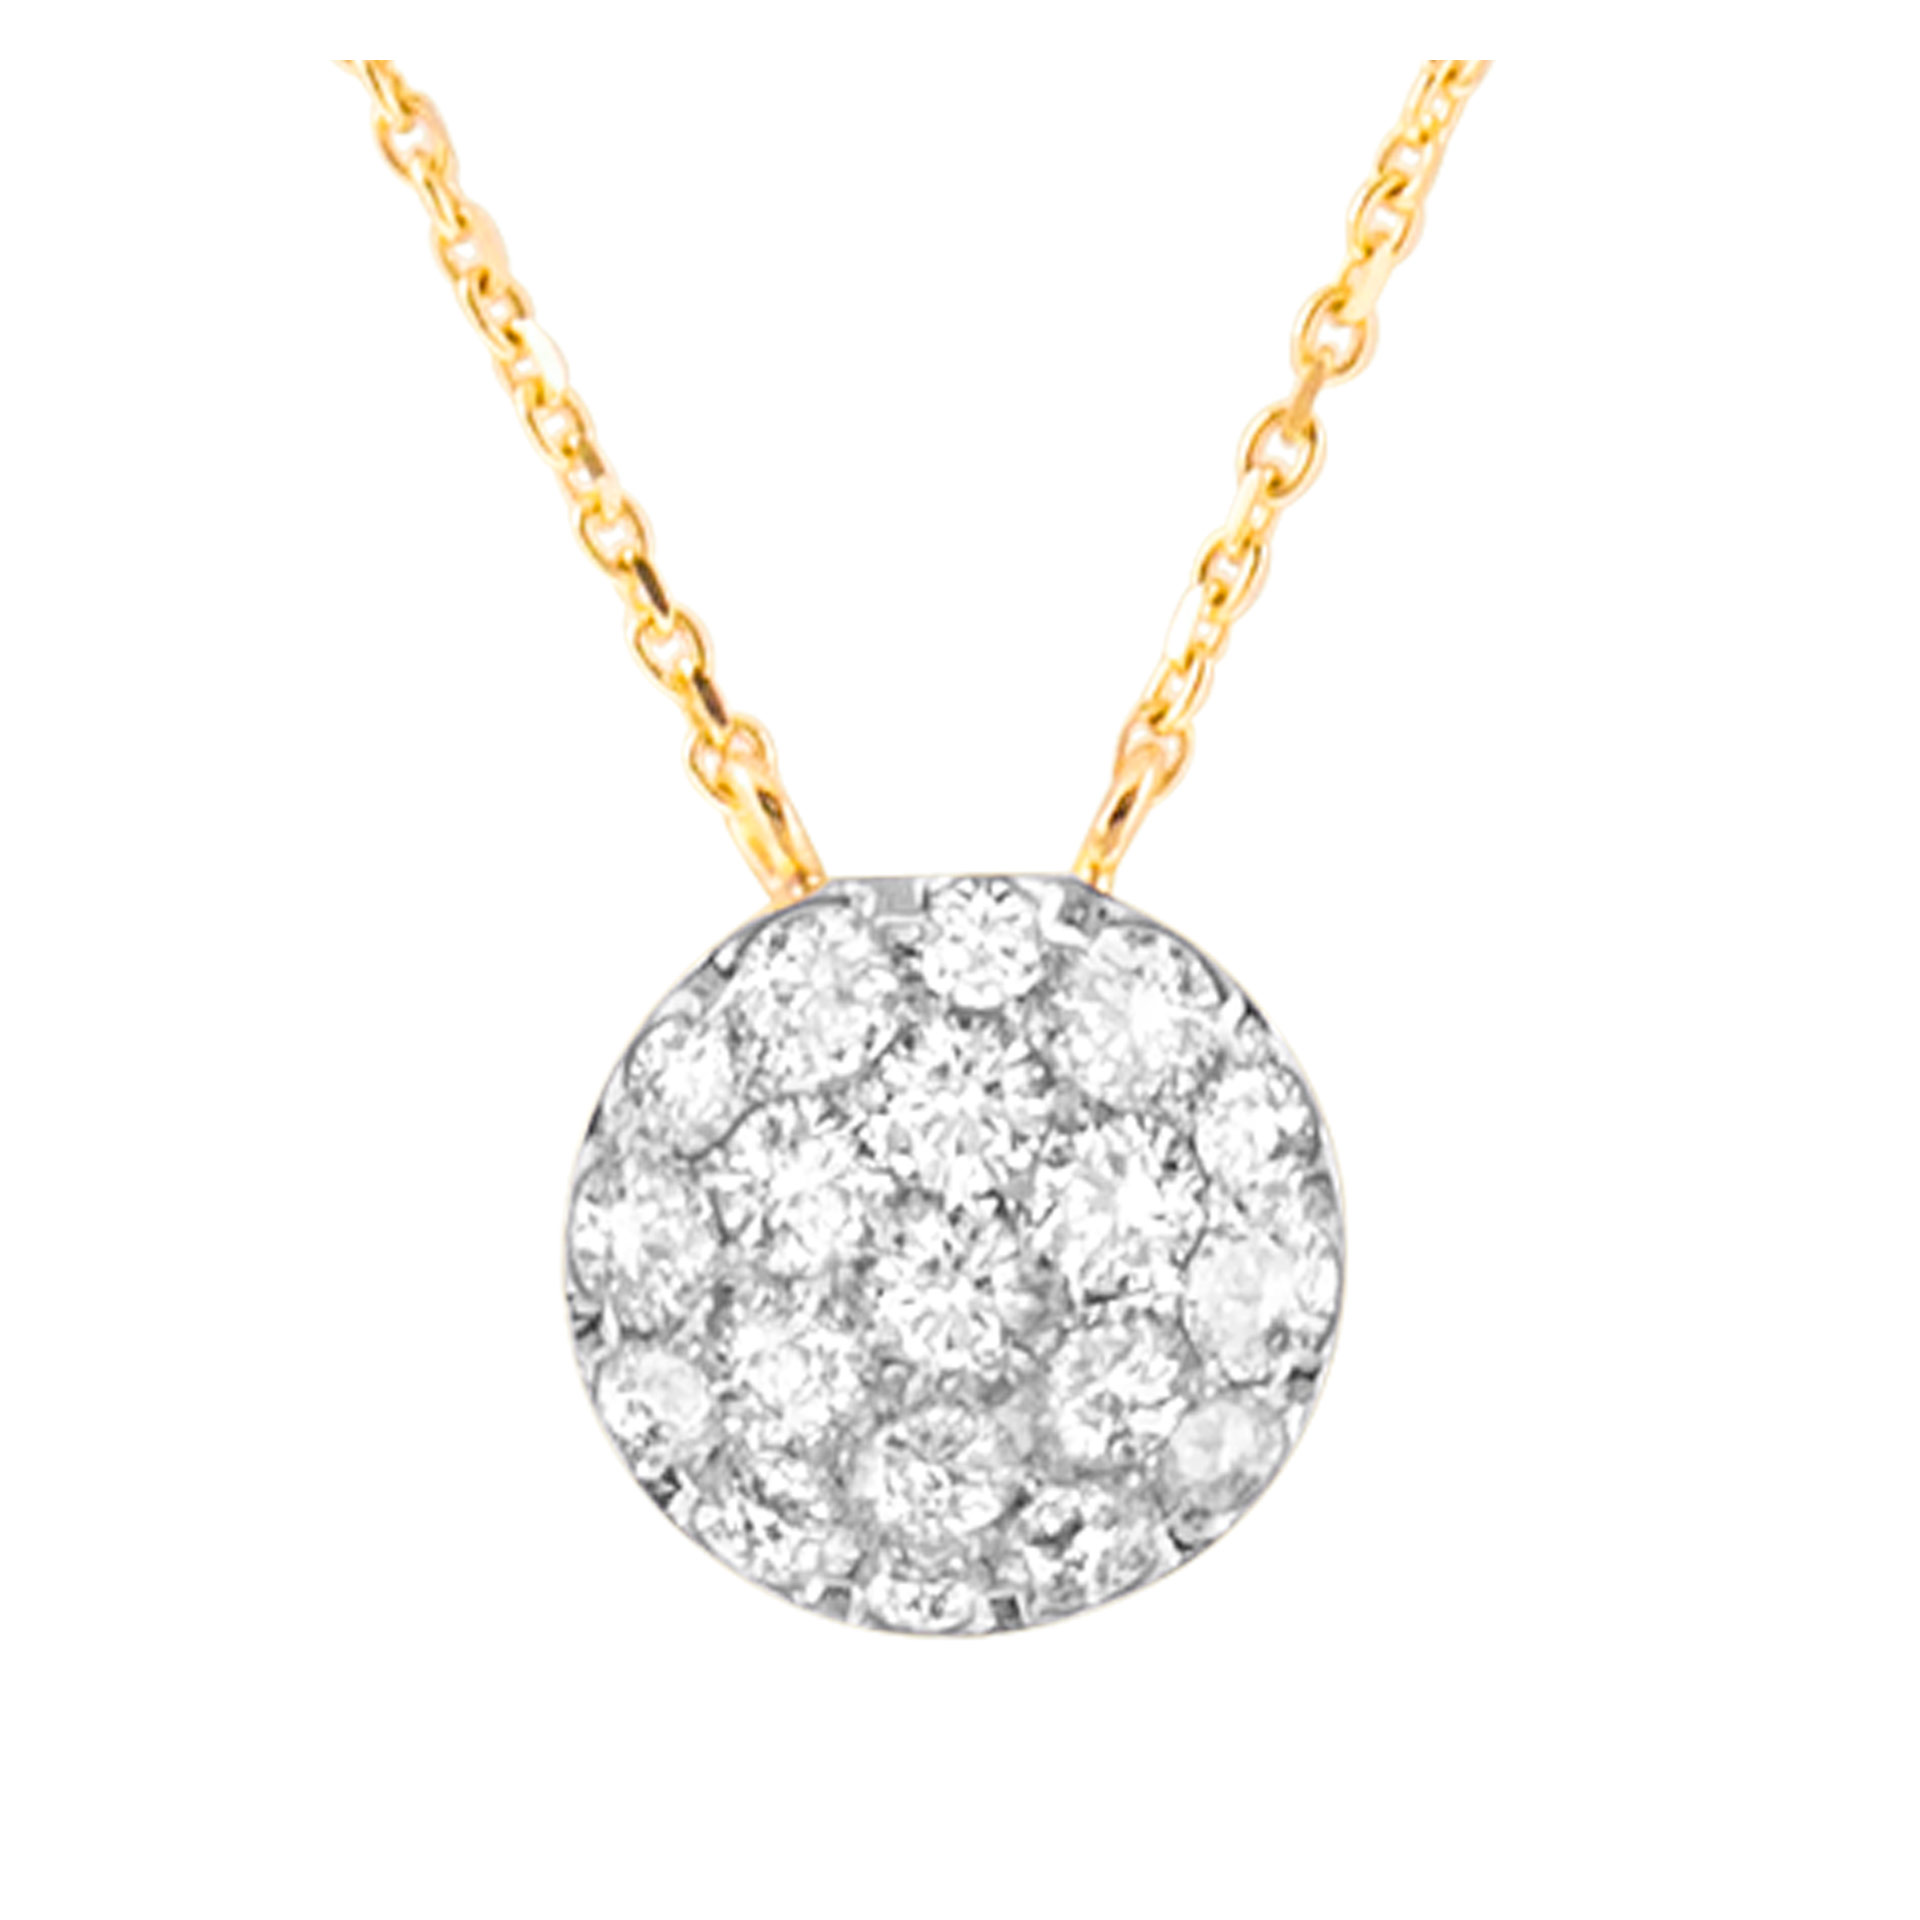 Diamond necklace in 18k yellow gold image 1